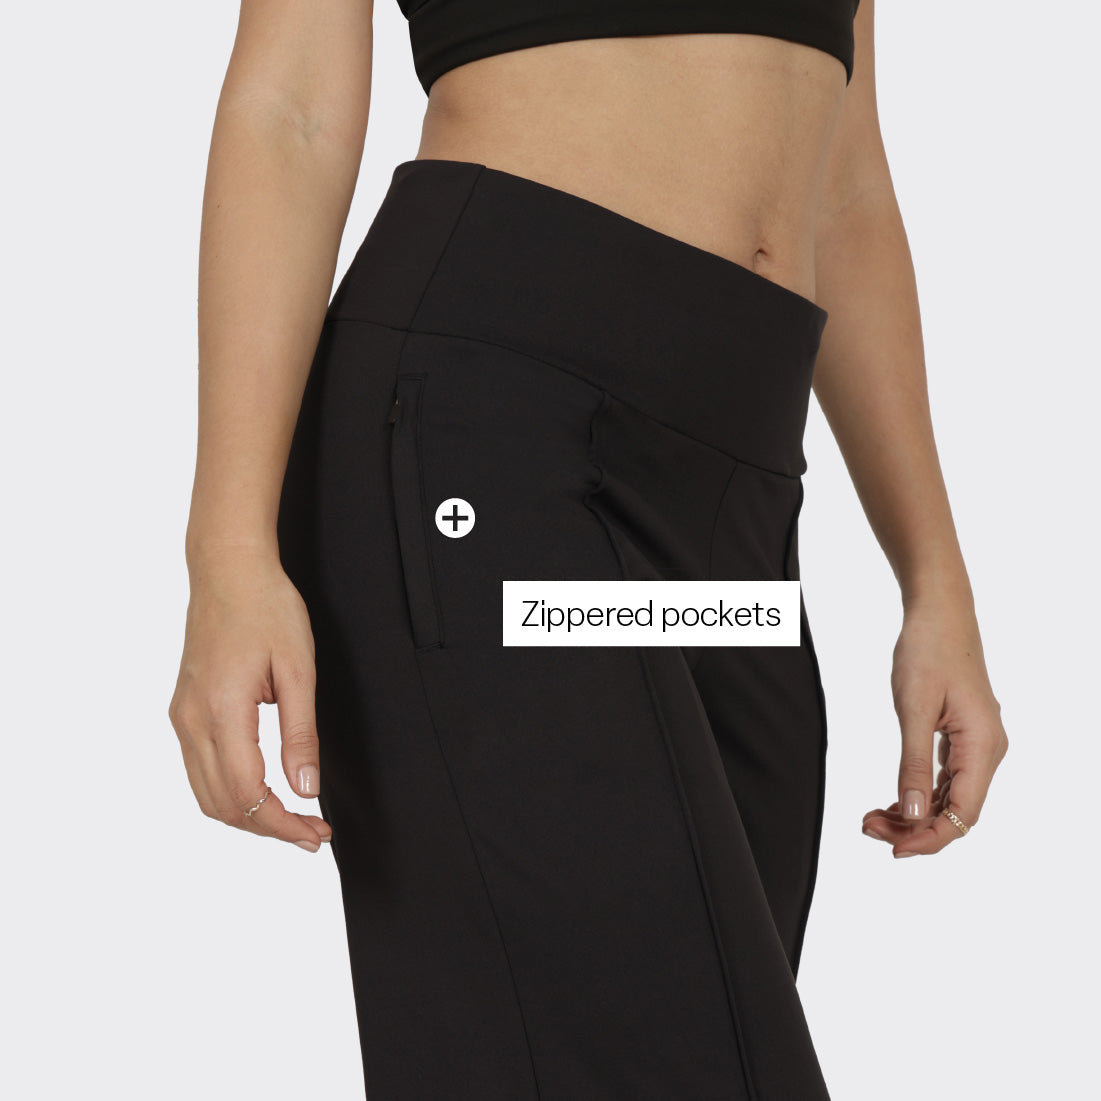 High Waisted Wide Legged Pants with Adjustable Drawstring and 2